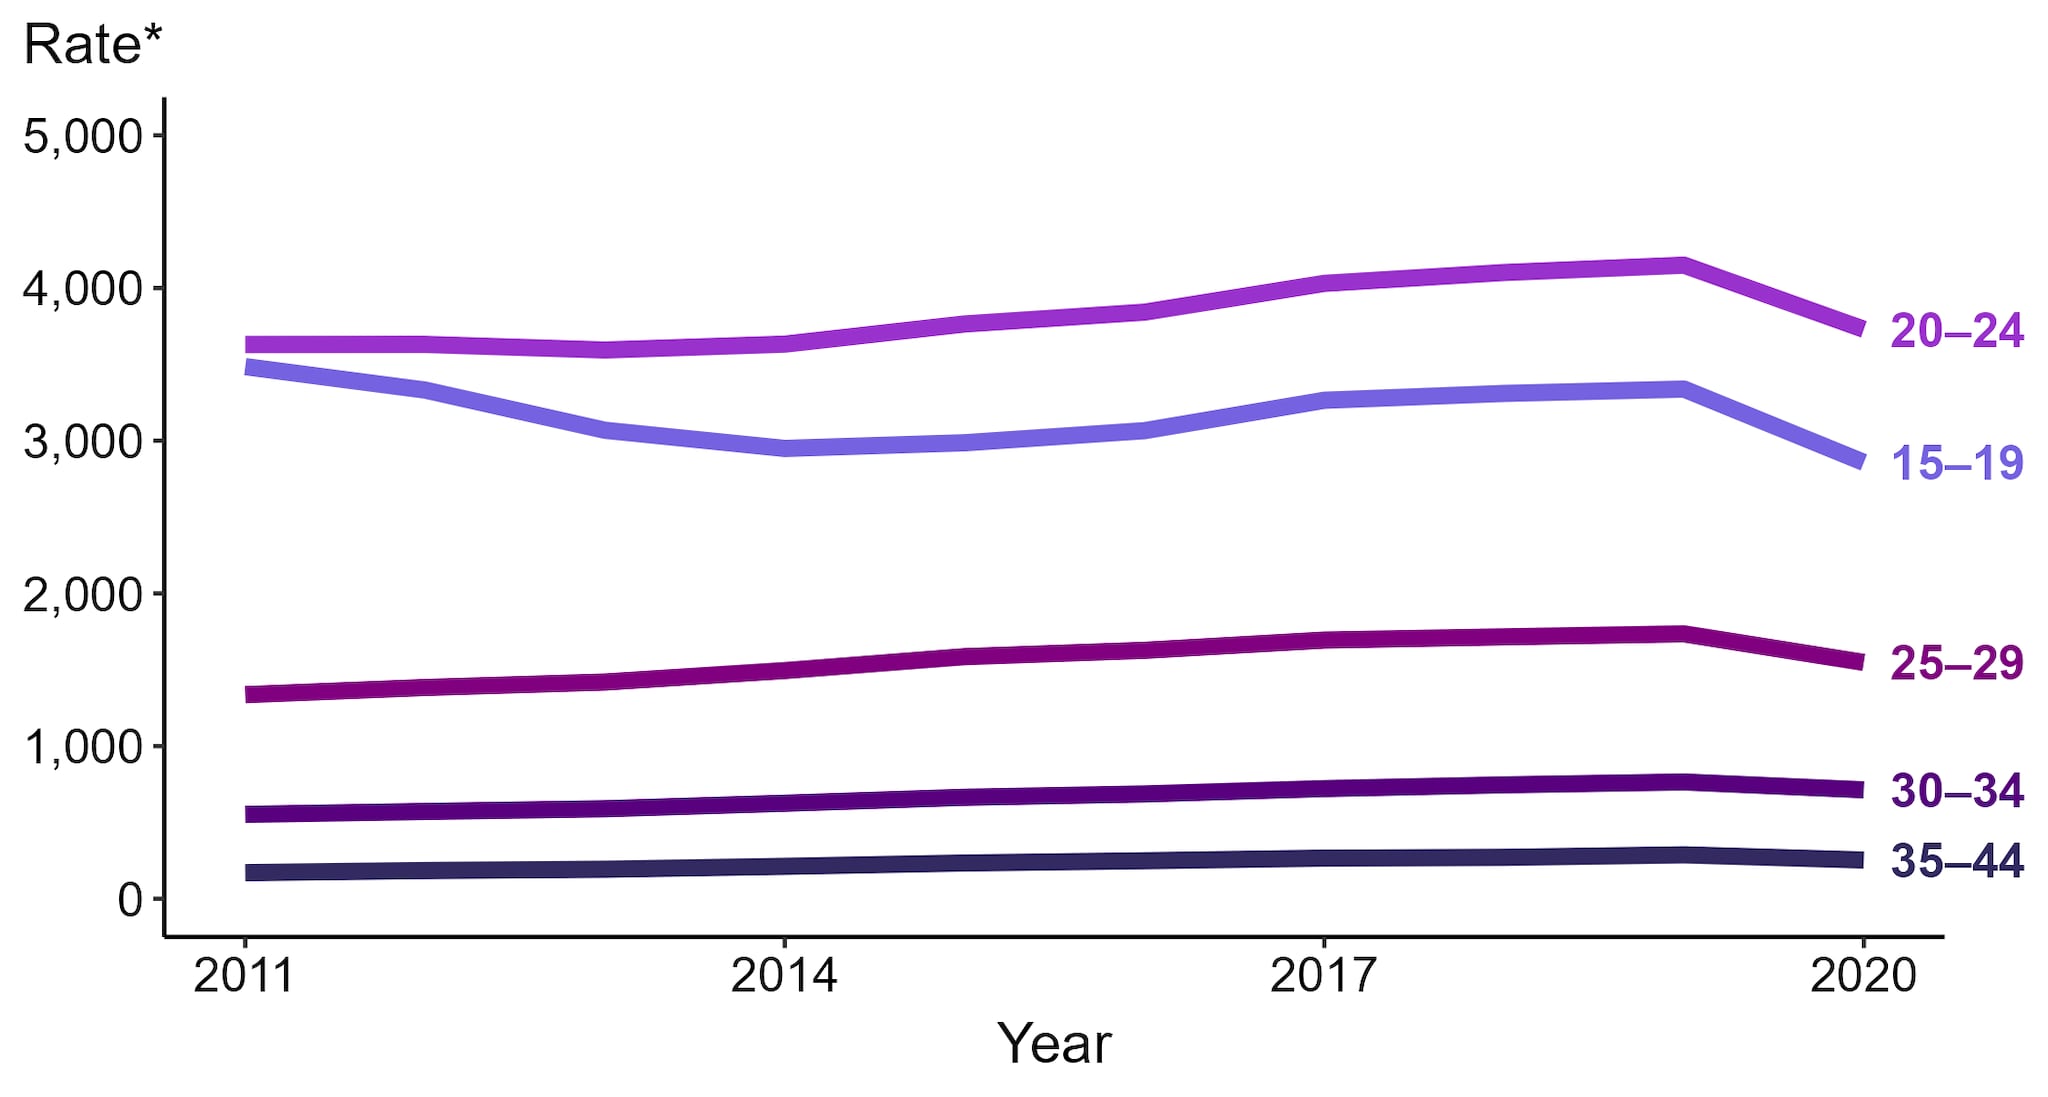 Line graph showing rates of reported cases of chlamydia in the United States among women aged 15 to 44 years by age group from 2011 to 2020.